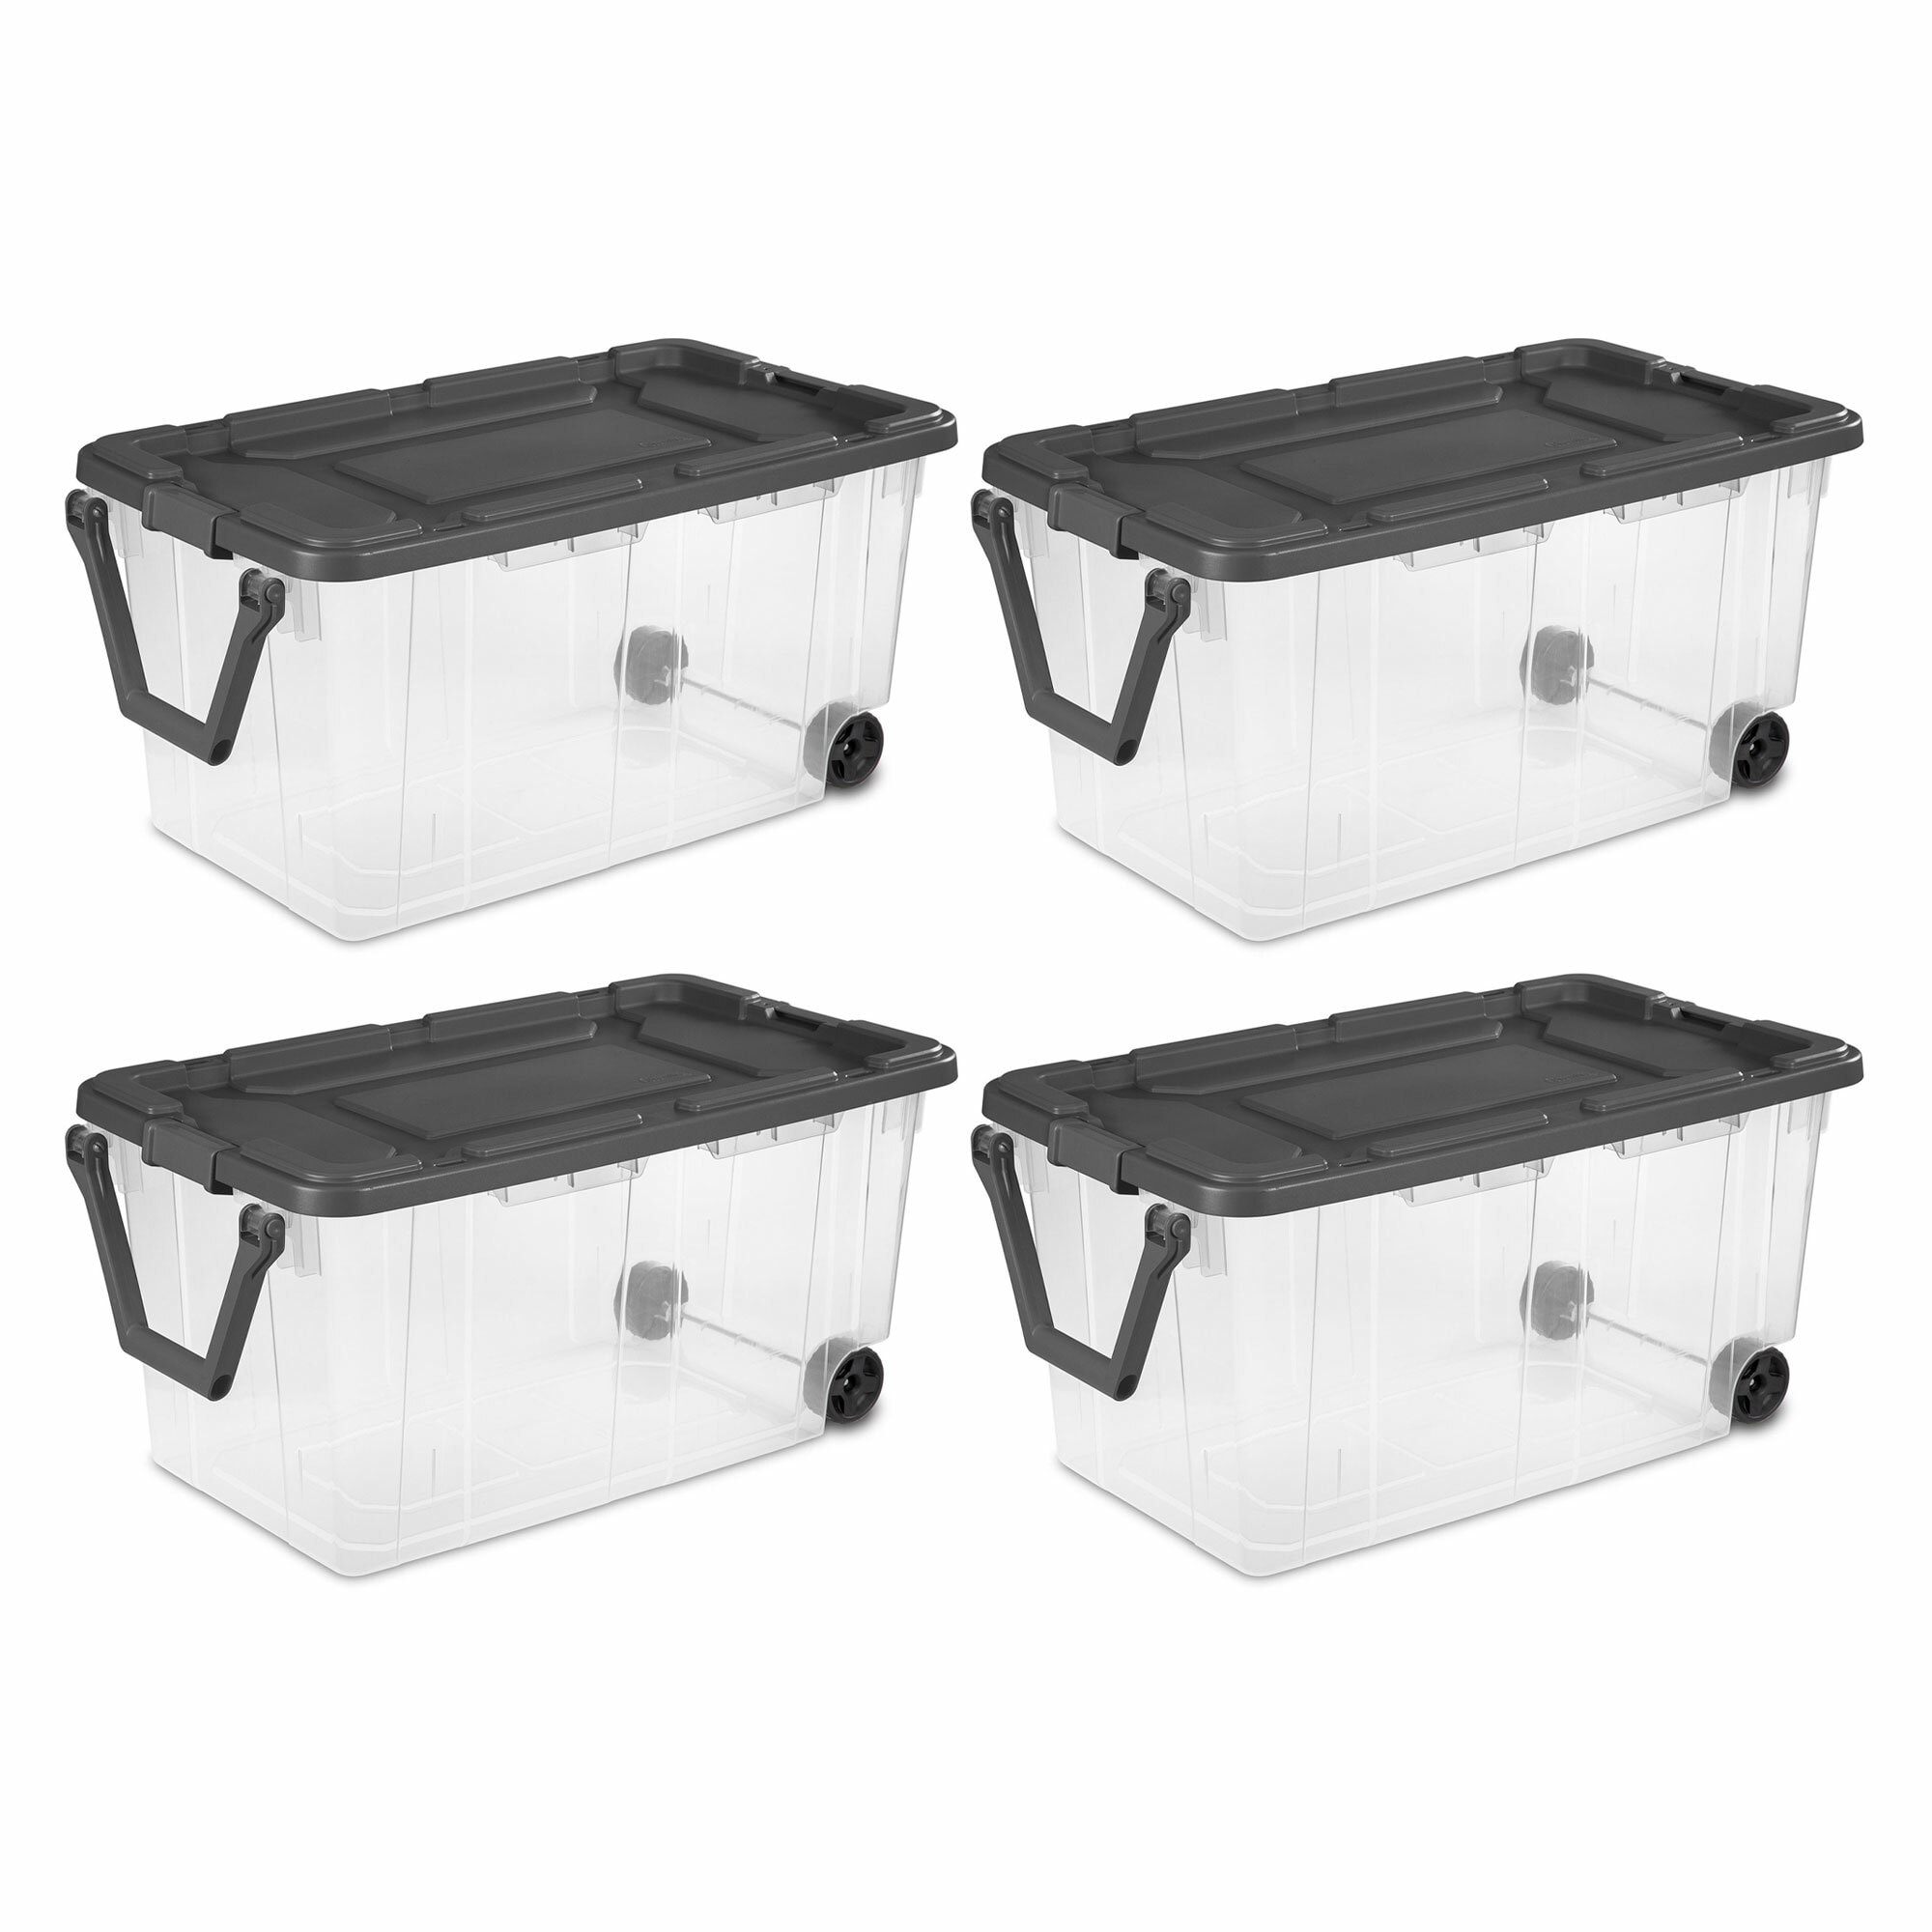 21 Inch Wide Plastic Storage Containers at